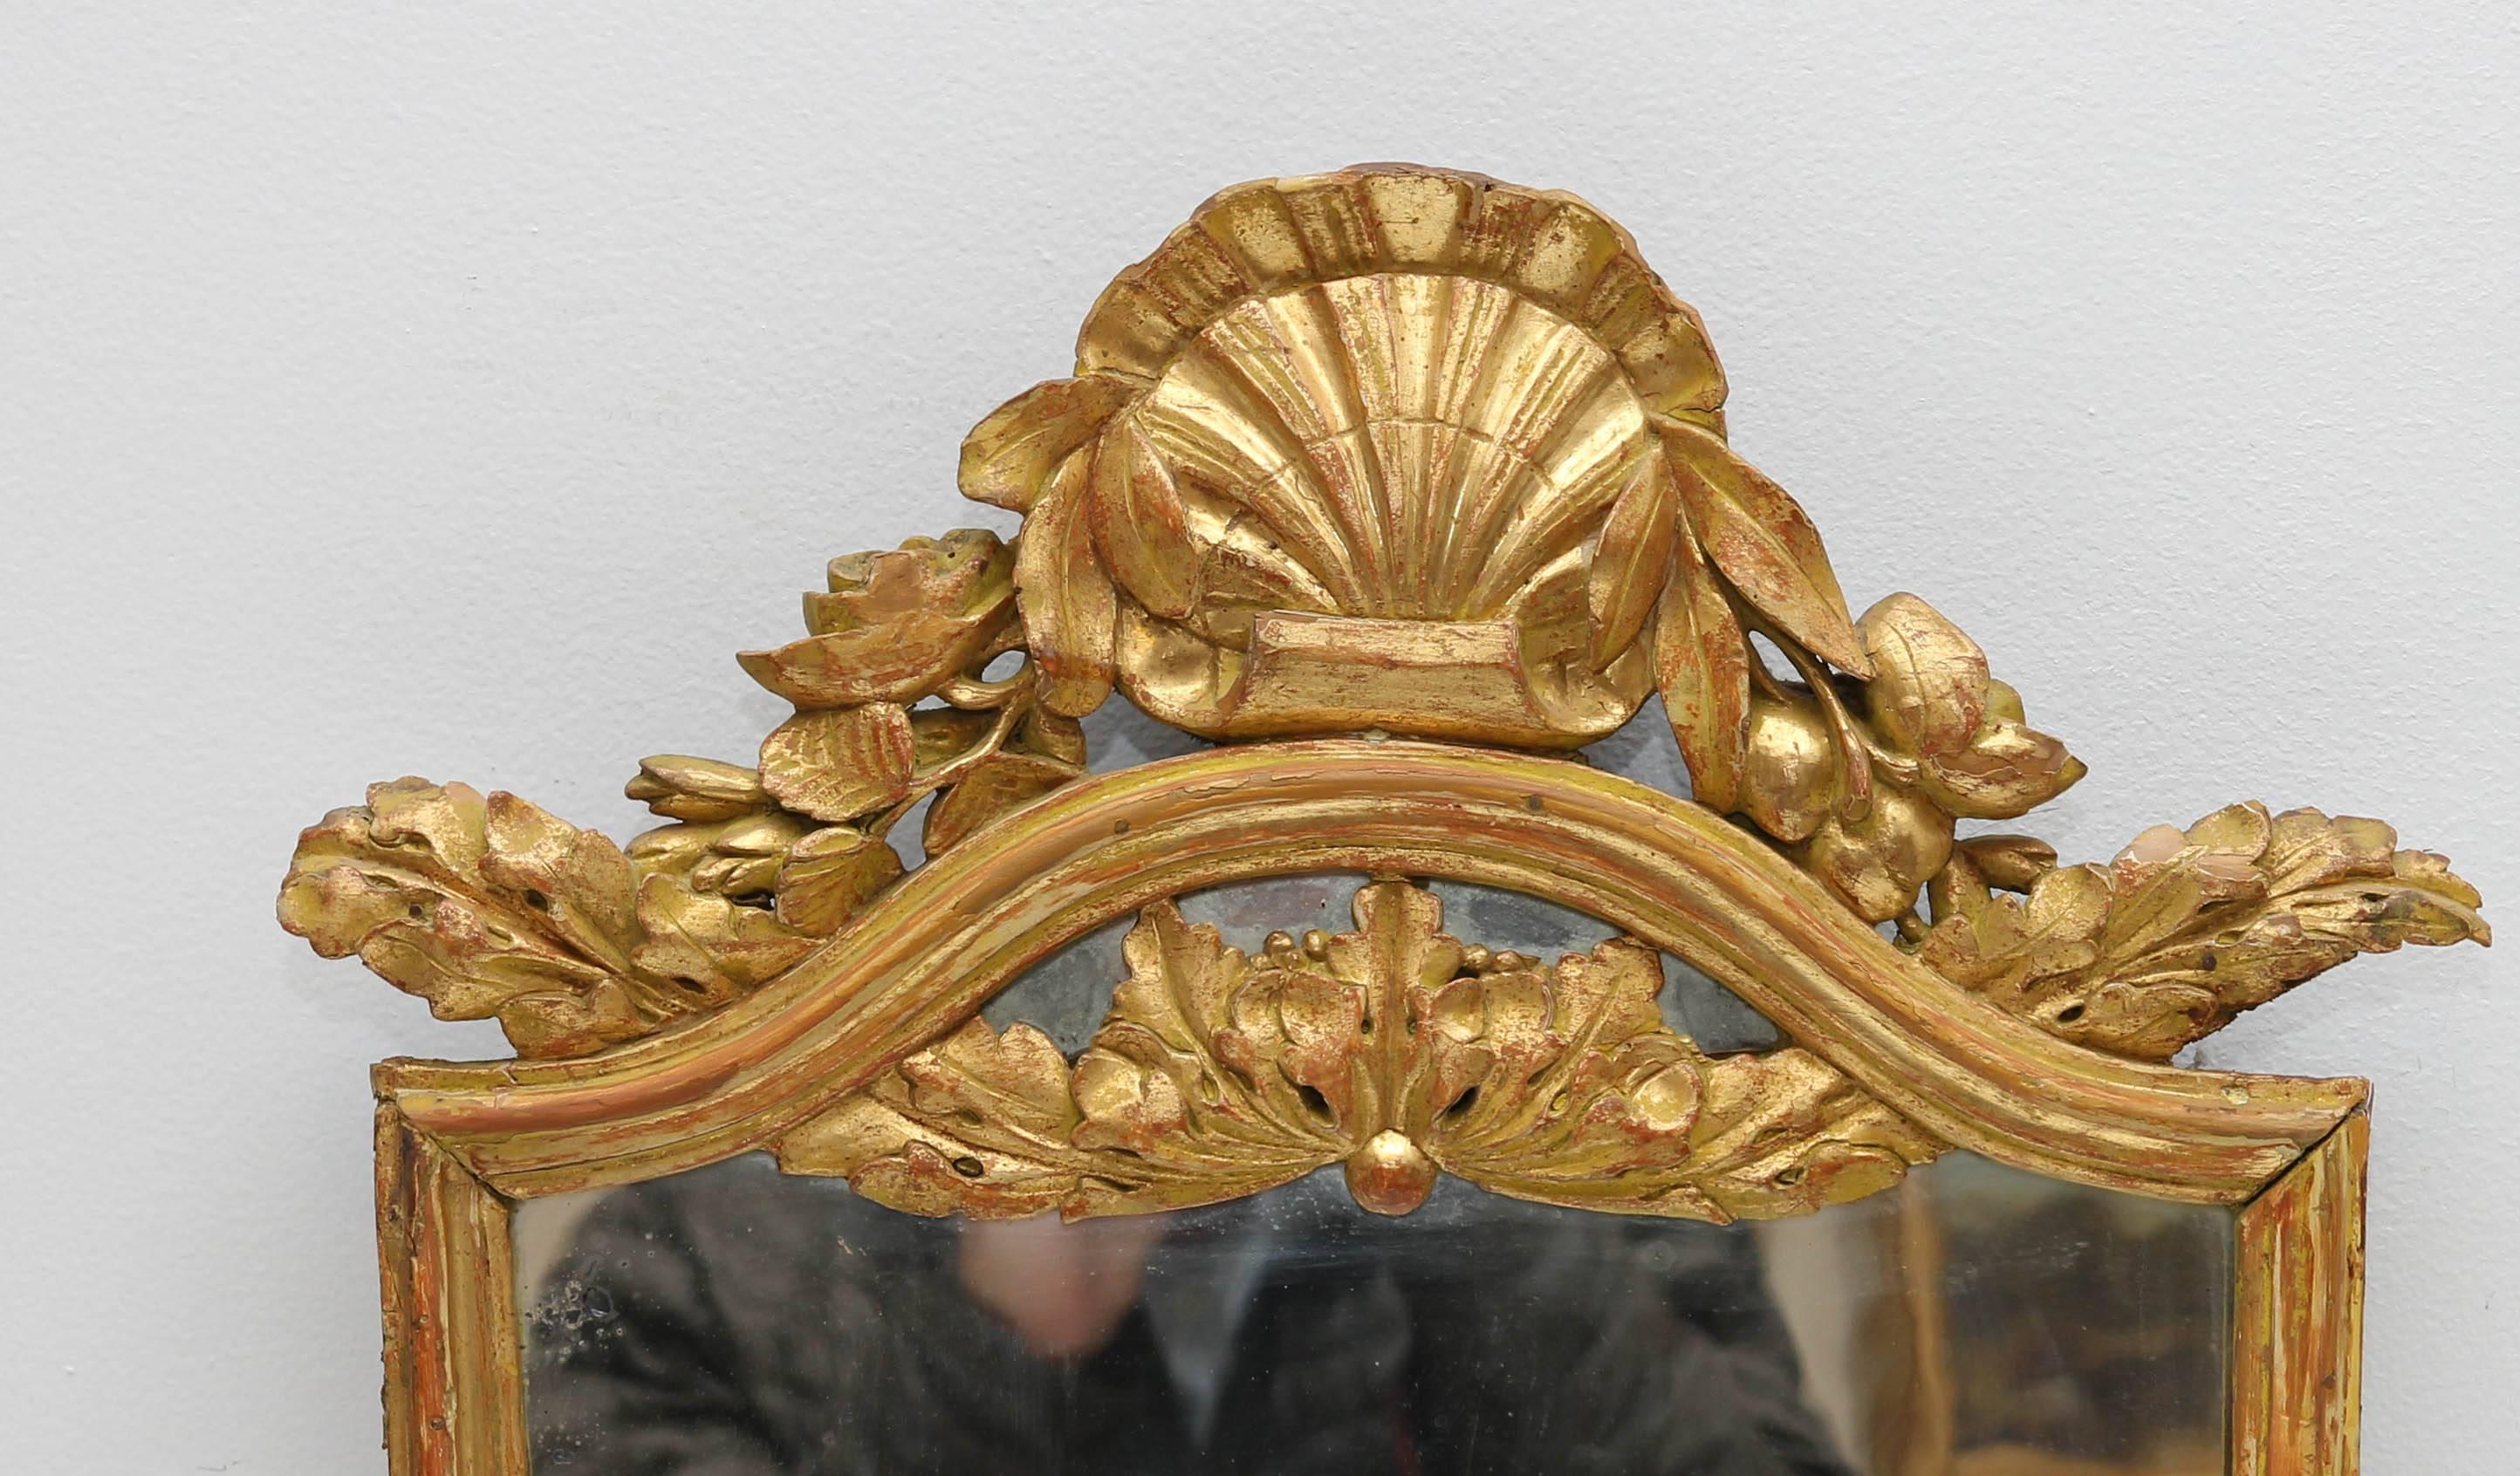 Italian 18th century carved and gilt neoclassical console mirror. Frame has been re-gilded. Original wavy mirror glass.